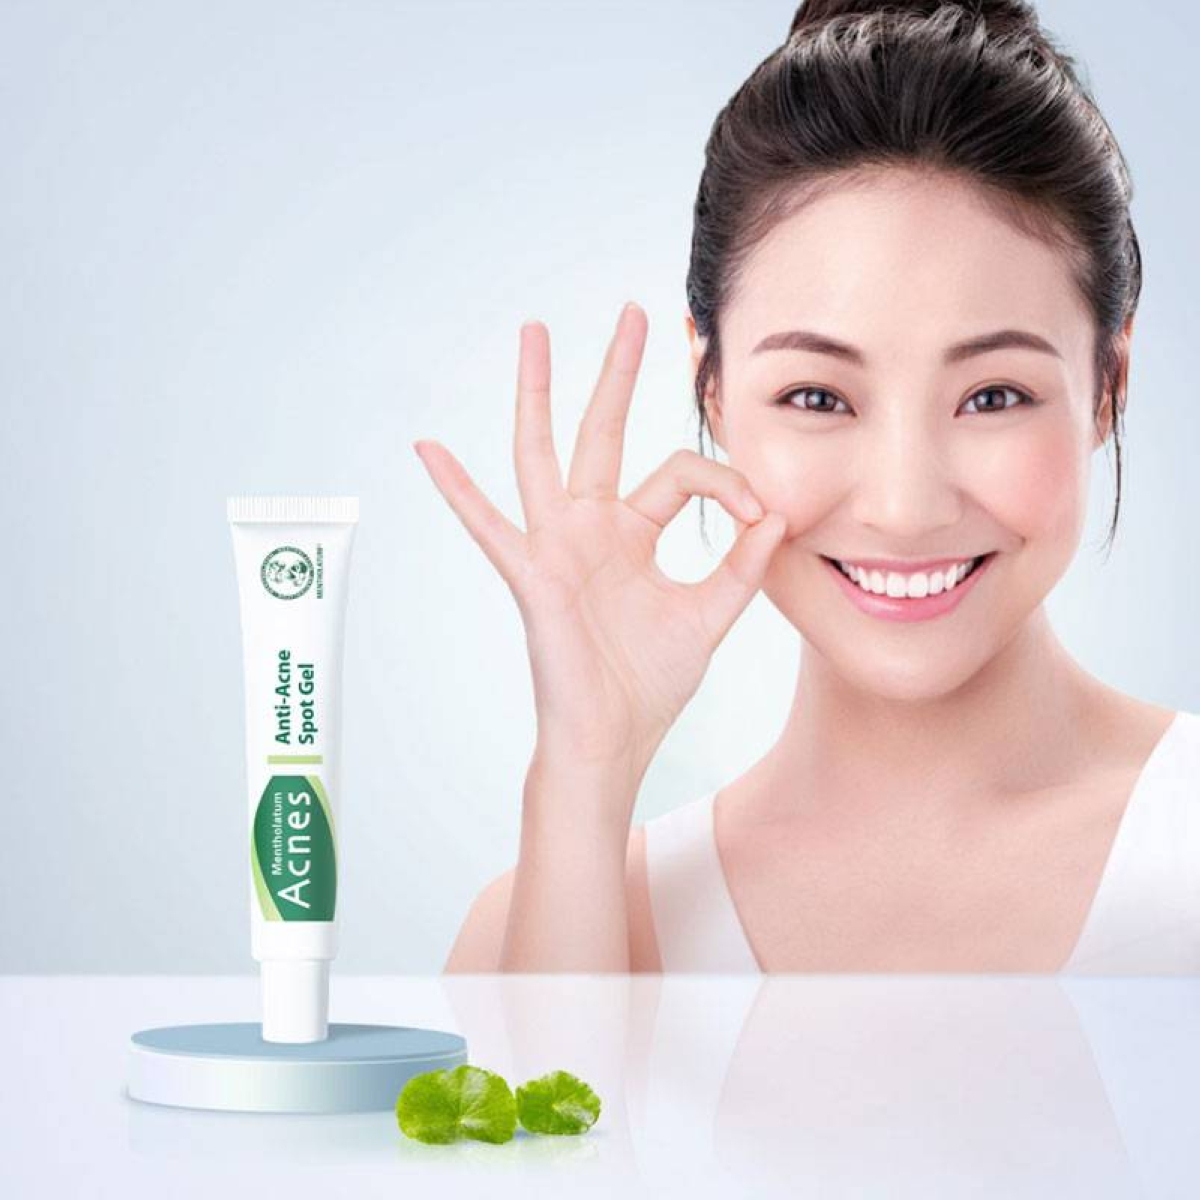 Acnes products harness the healing power of Centella asiatica, or Cica.